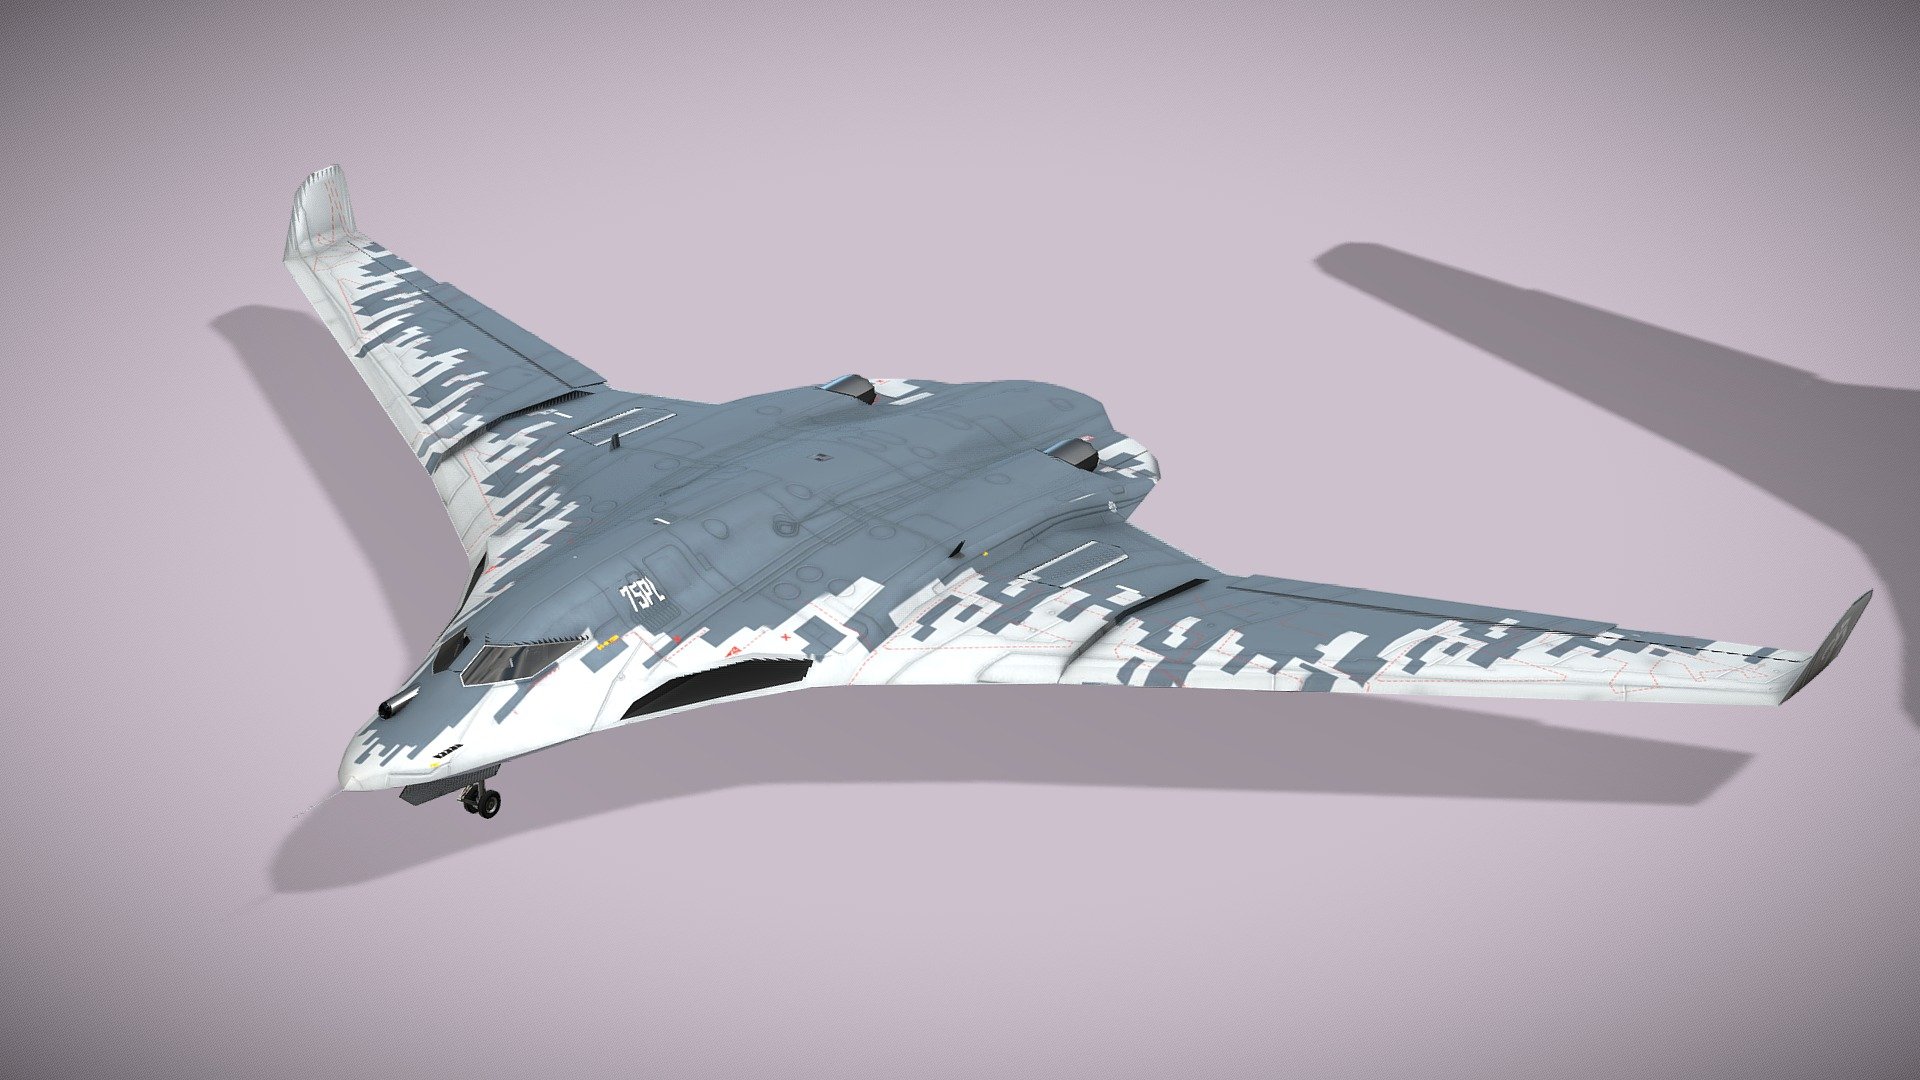 Tupolev PAK DA Envoy

Lowpoly model of russian stealth strategic bomber



The Tupolev PAK DA codename Poslannik &lsquo;Envoy' is a next-generation stealth strategic bomber being developed by Tupolev for the Long-Range Aviation branch of the Russian Aerospace Forces. The PAK DA is set to complement and eventually replace the older Tupolev Tu-95 in Russia's Air Force service.
Technical parameters of the PAK DA include subsonic speed, 12000 km operational range and a capability to continuously remain in the air for up to 30 hours while carrying both conventional and nuclear payloads up to 30 tons. The aircraft is expected to have a crew of 4.

This is my own concept of PAK DA design. 



Standing version and flying with separate color schemes

Fully rigged

Model has bump map, roughness map and 2 x diffuse textures

incl. STL 3D print file



Check also my aircrafts and cars

Patreon with monthly free model - Tupolev PAK DA Envoy - Buy Royalty Free 3D model by NETRUNNER_pl 3d model